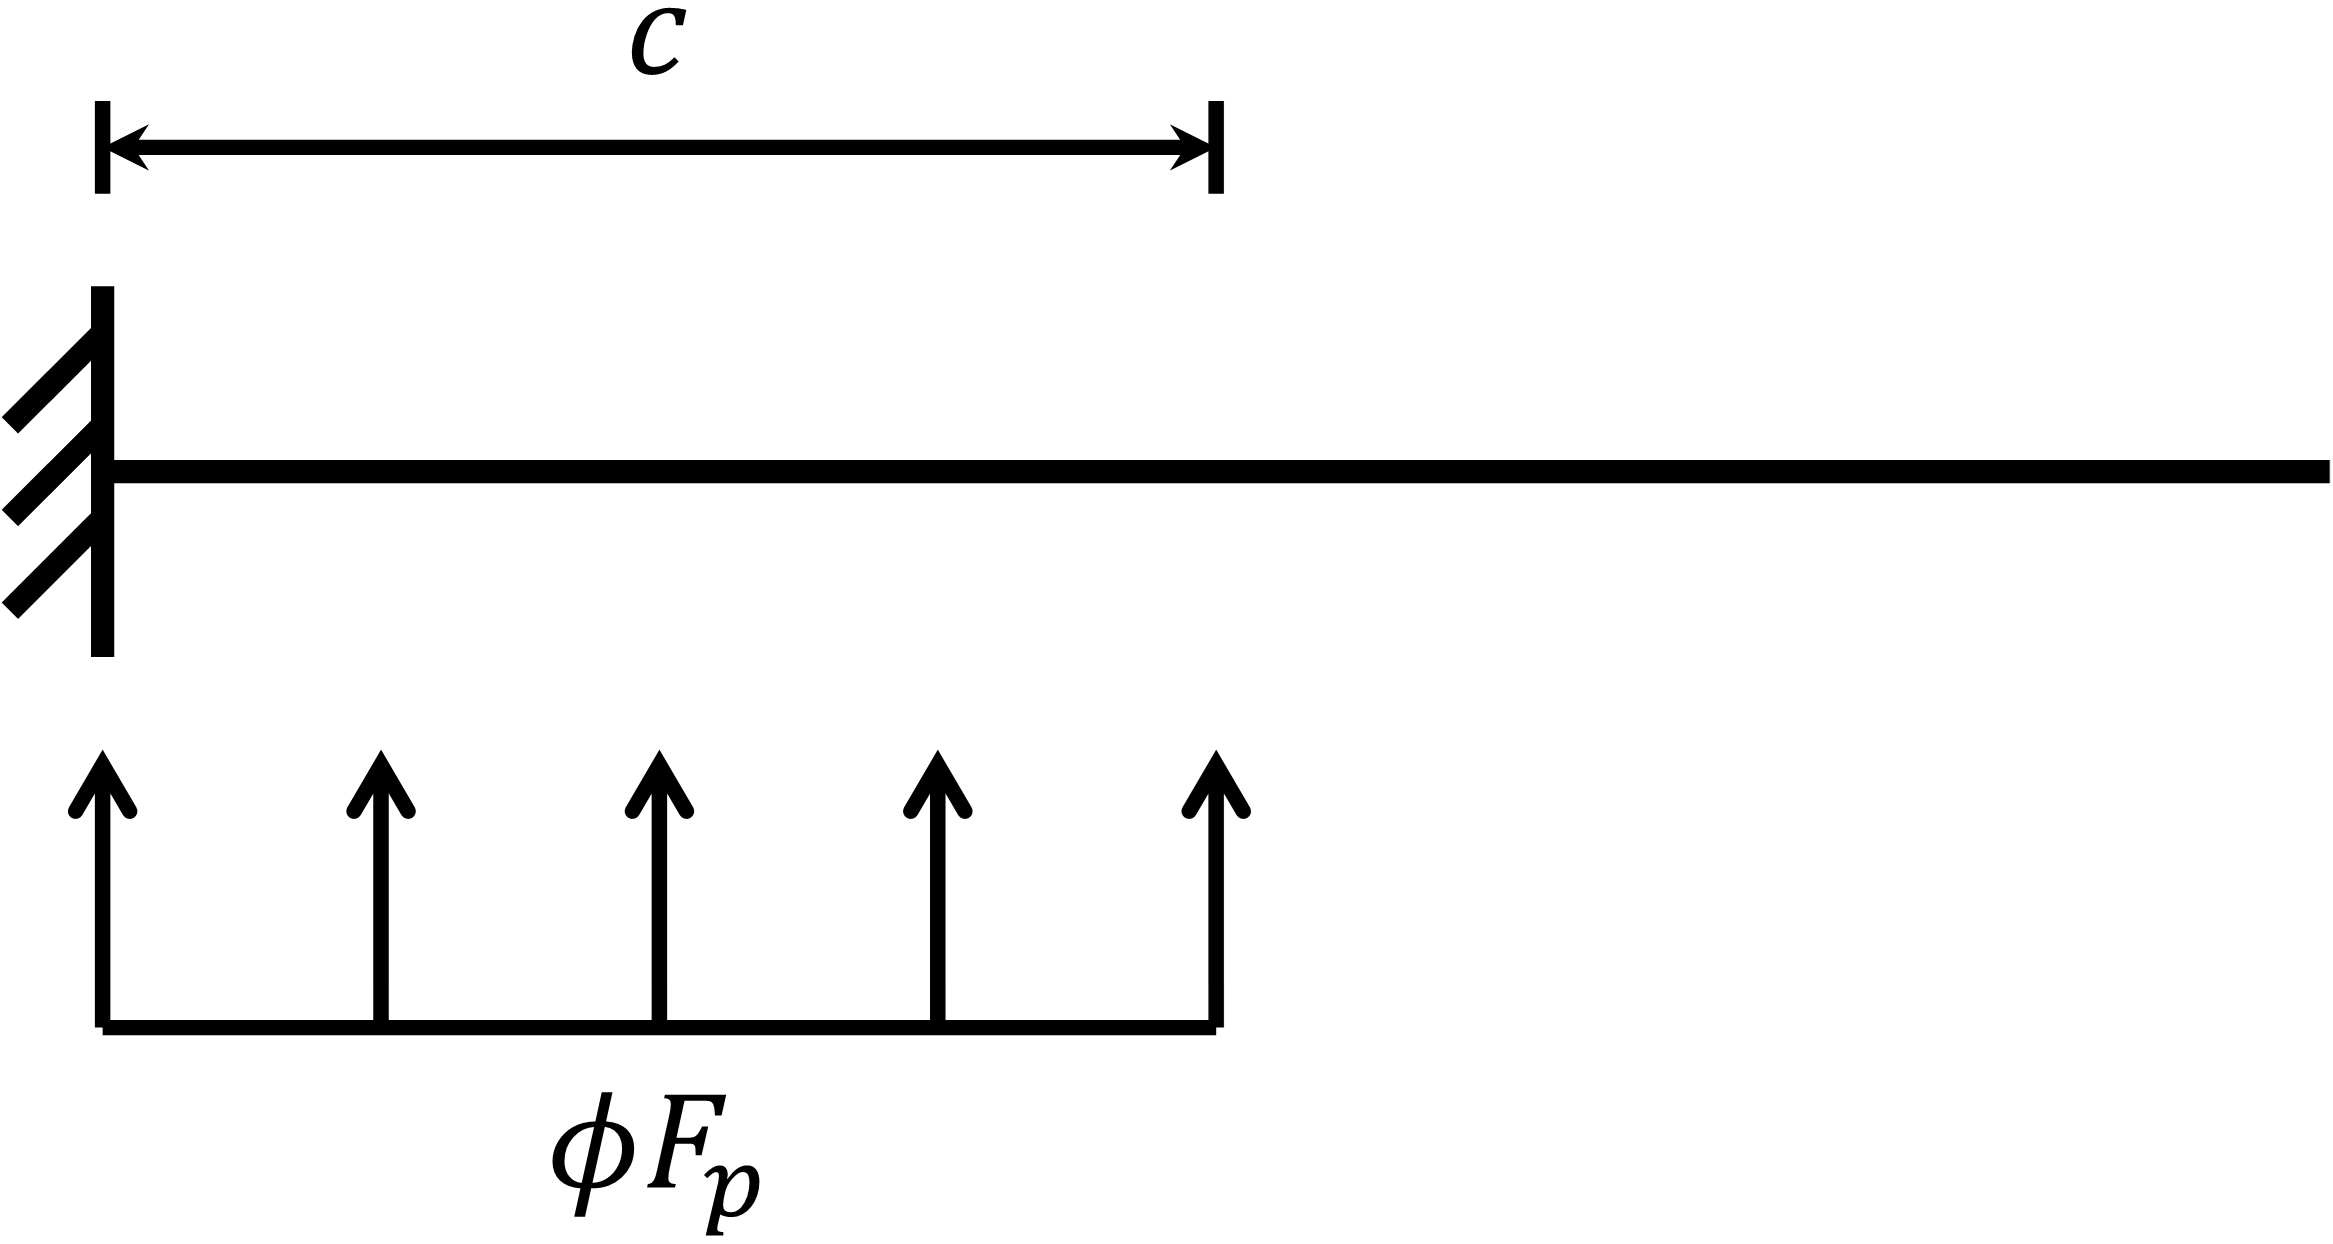 Cantilever beam analogy for determination of dimension c